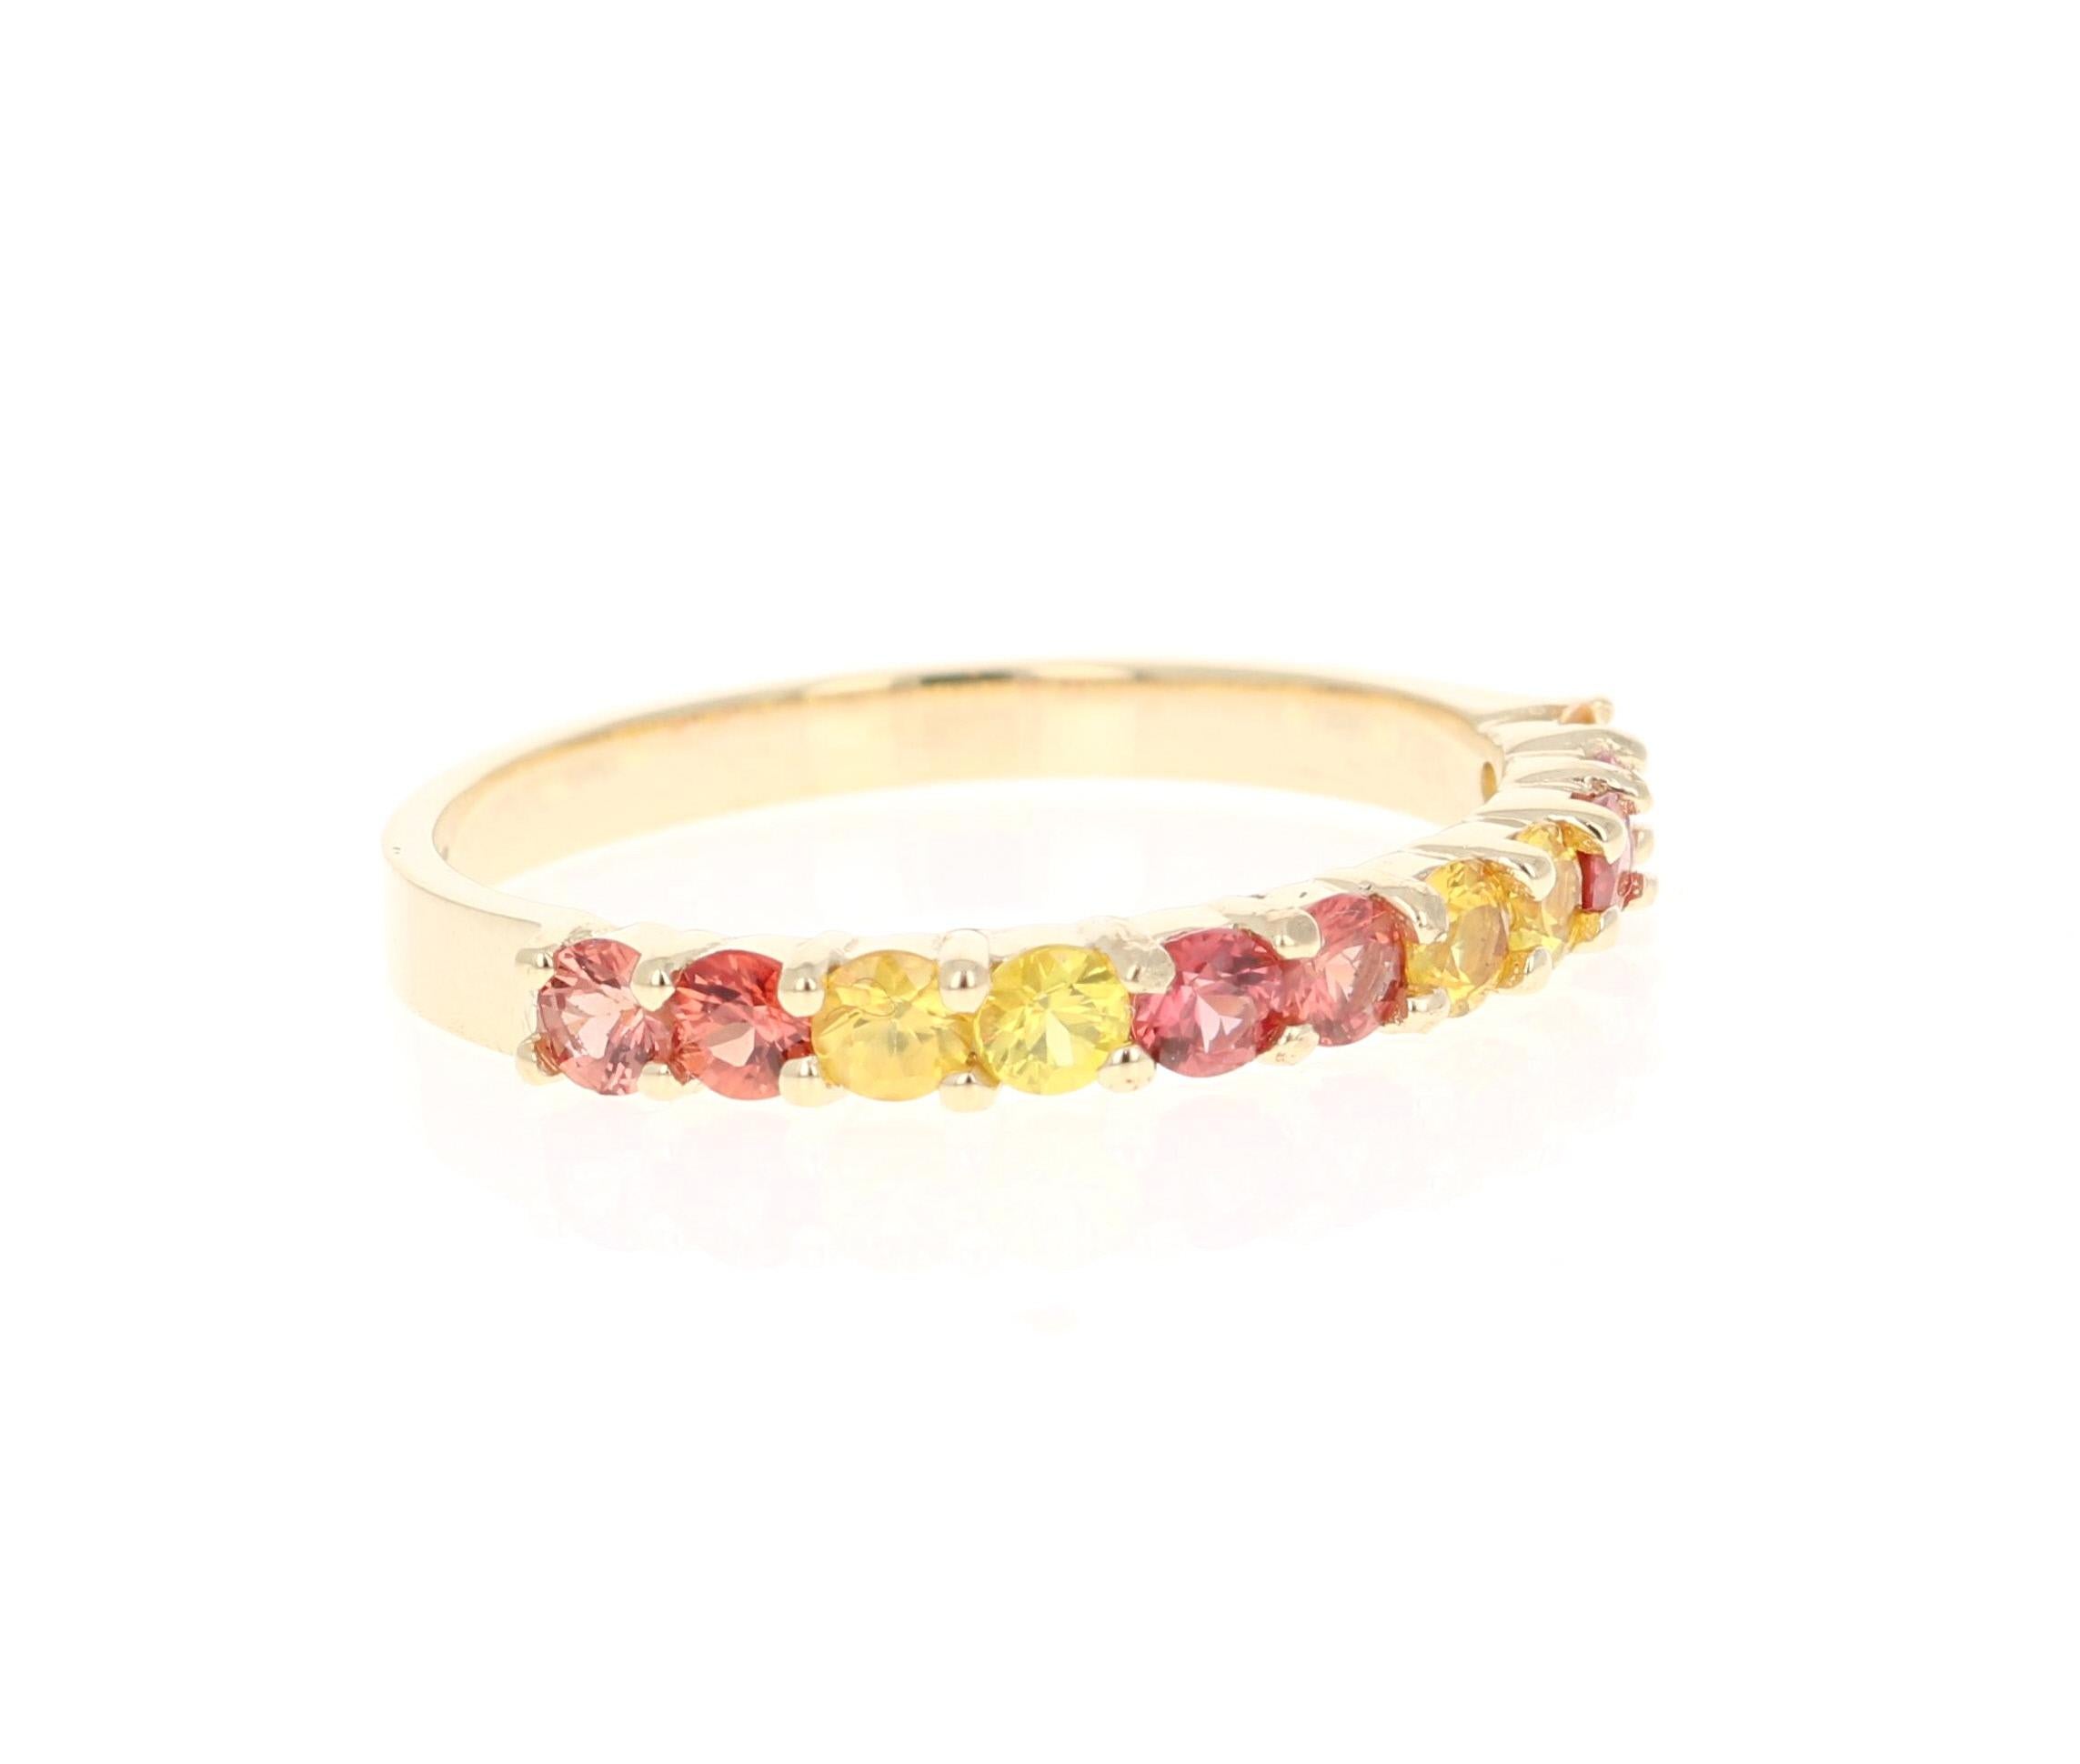 There are 11 Multicolored Genuine Red and Yellow Sapphires in this band that weigh 0.90 Carats.  
It is perfect for everyday wear and looks amazing stacked or alone. 
This band is created in 14 Karat Yellow Gold and weighs approximately 1.9